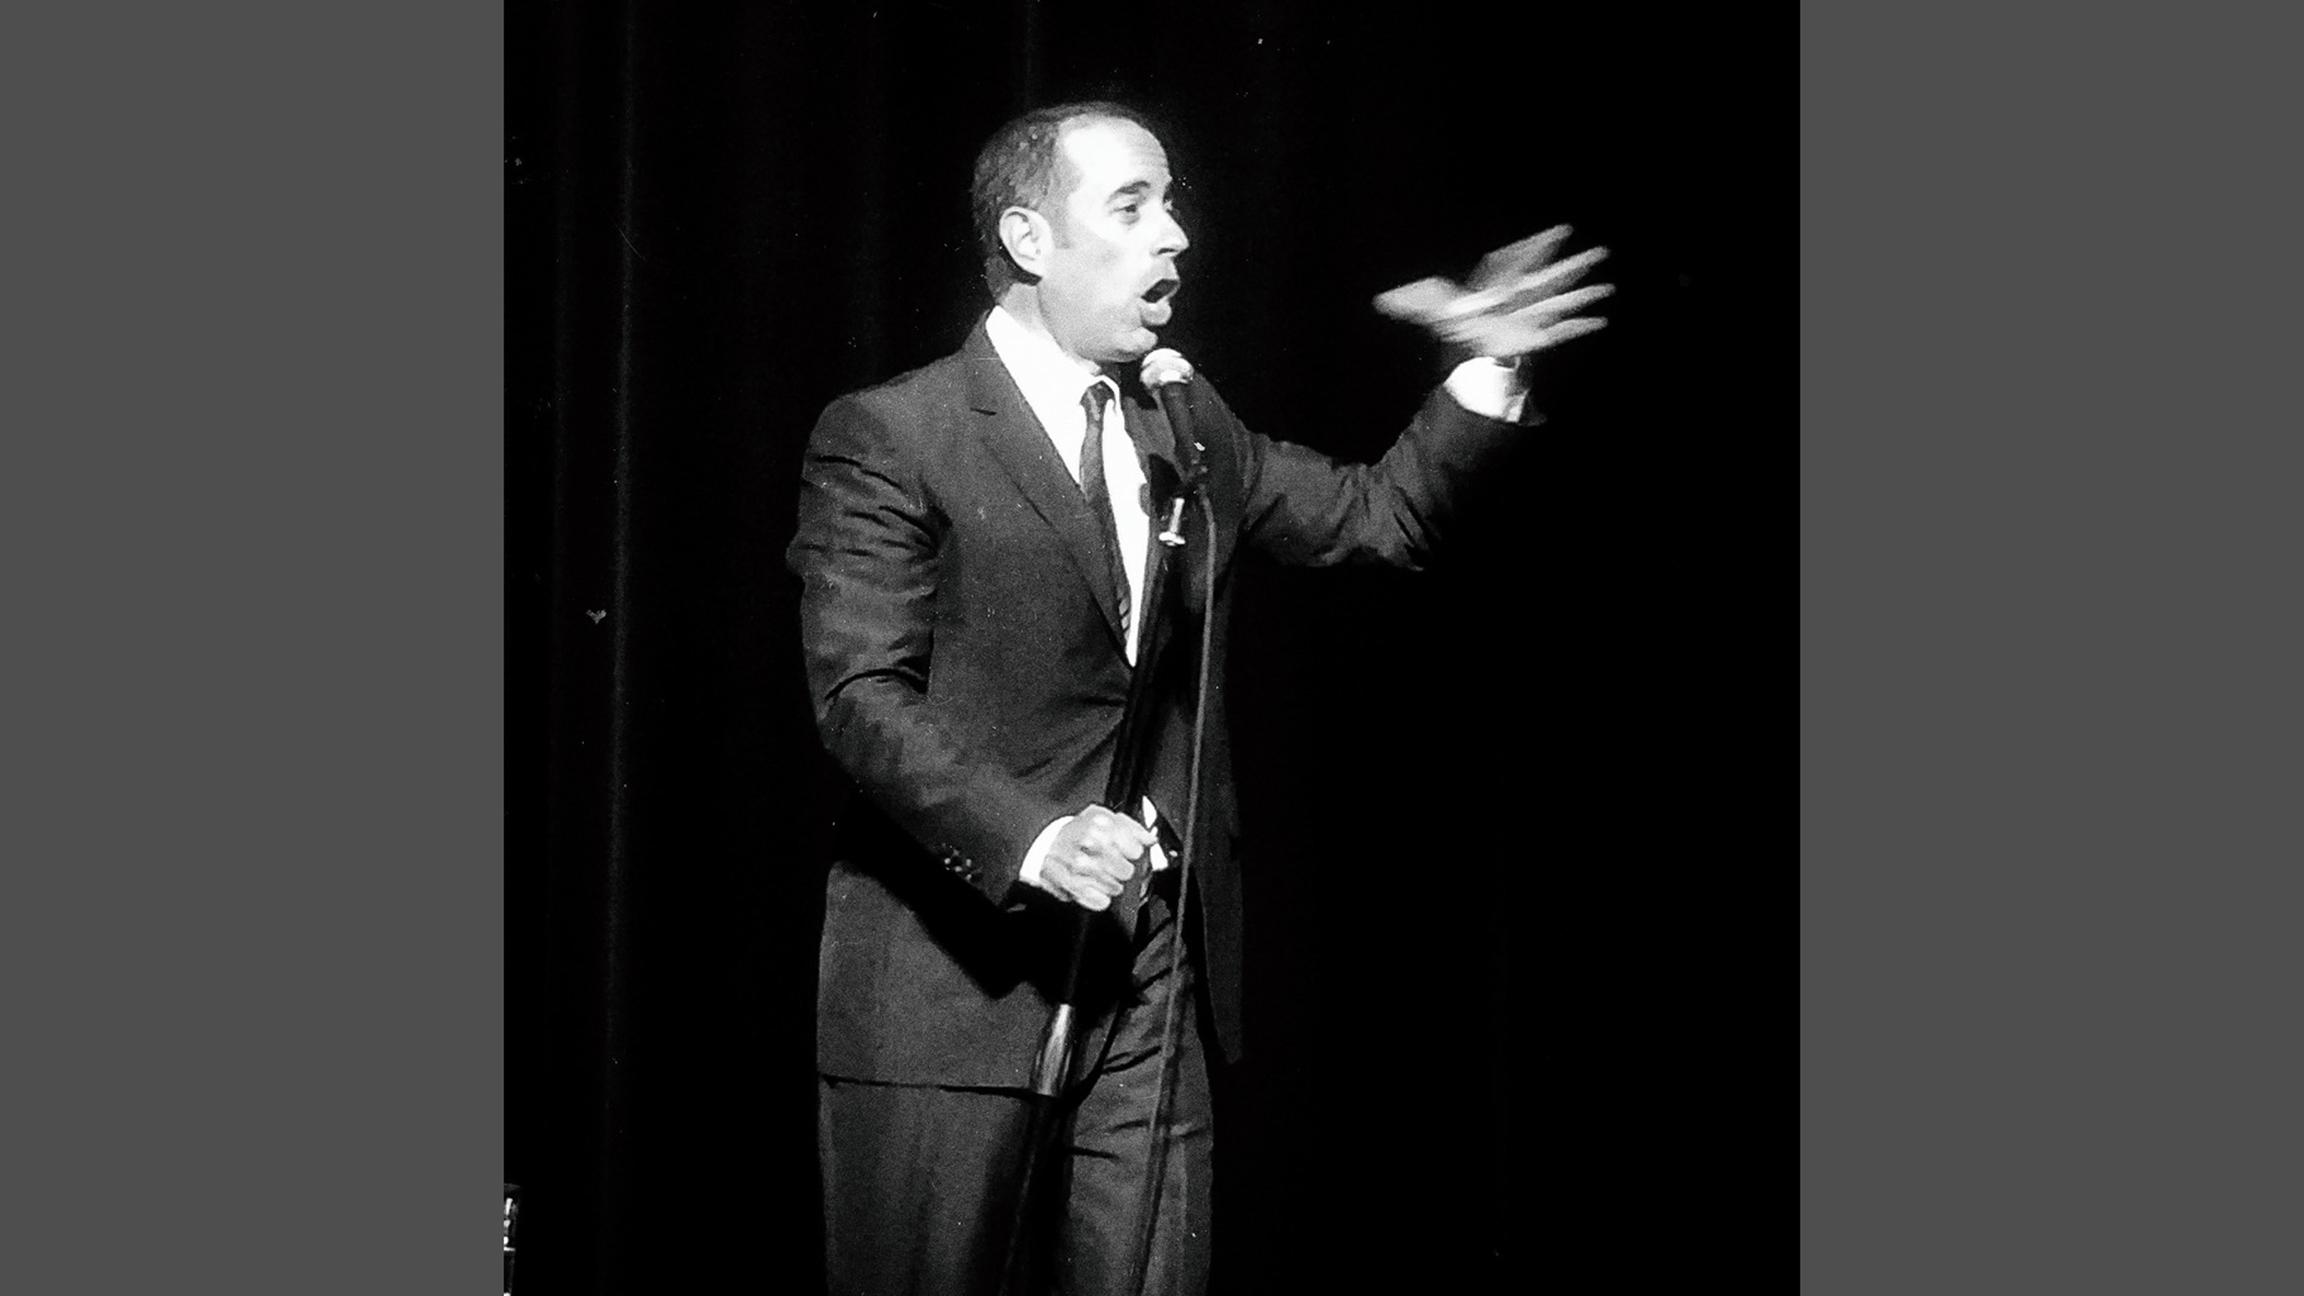 Jerry Seinfeld is often referred to as “the master of observational comedy.” (Thomas Hawk / Flickr)